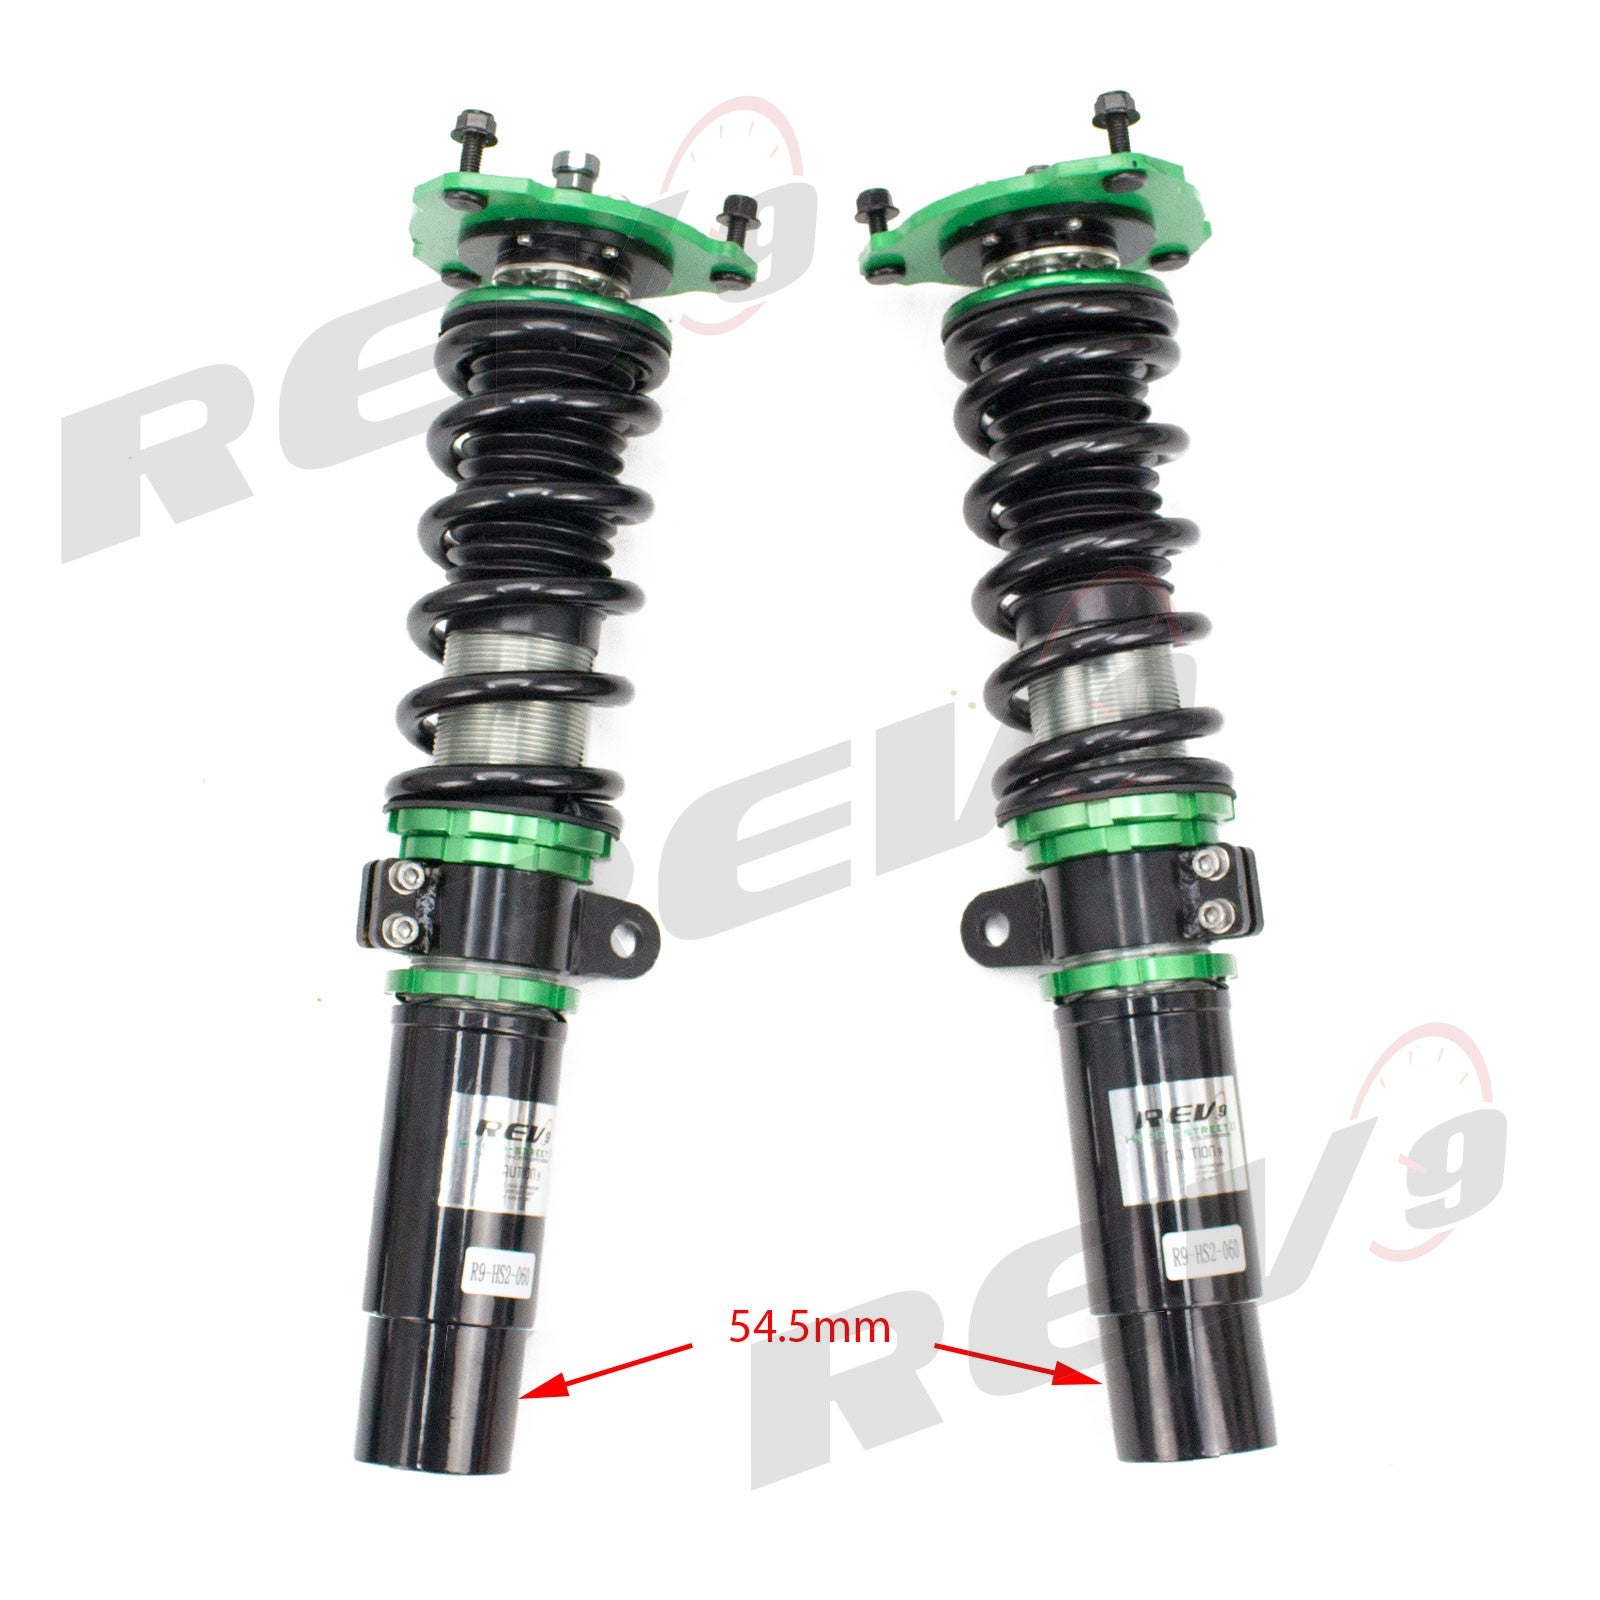 Rev9 Compatible With Volkswagen Beetle R-Line 2016-19 (54.5mm) Hyper-Street II Coilover Kit w/ 32-Way Damping Force Adjustment